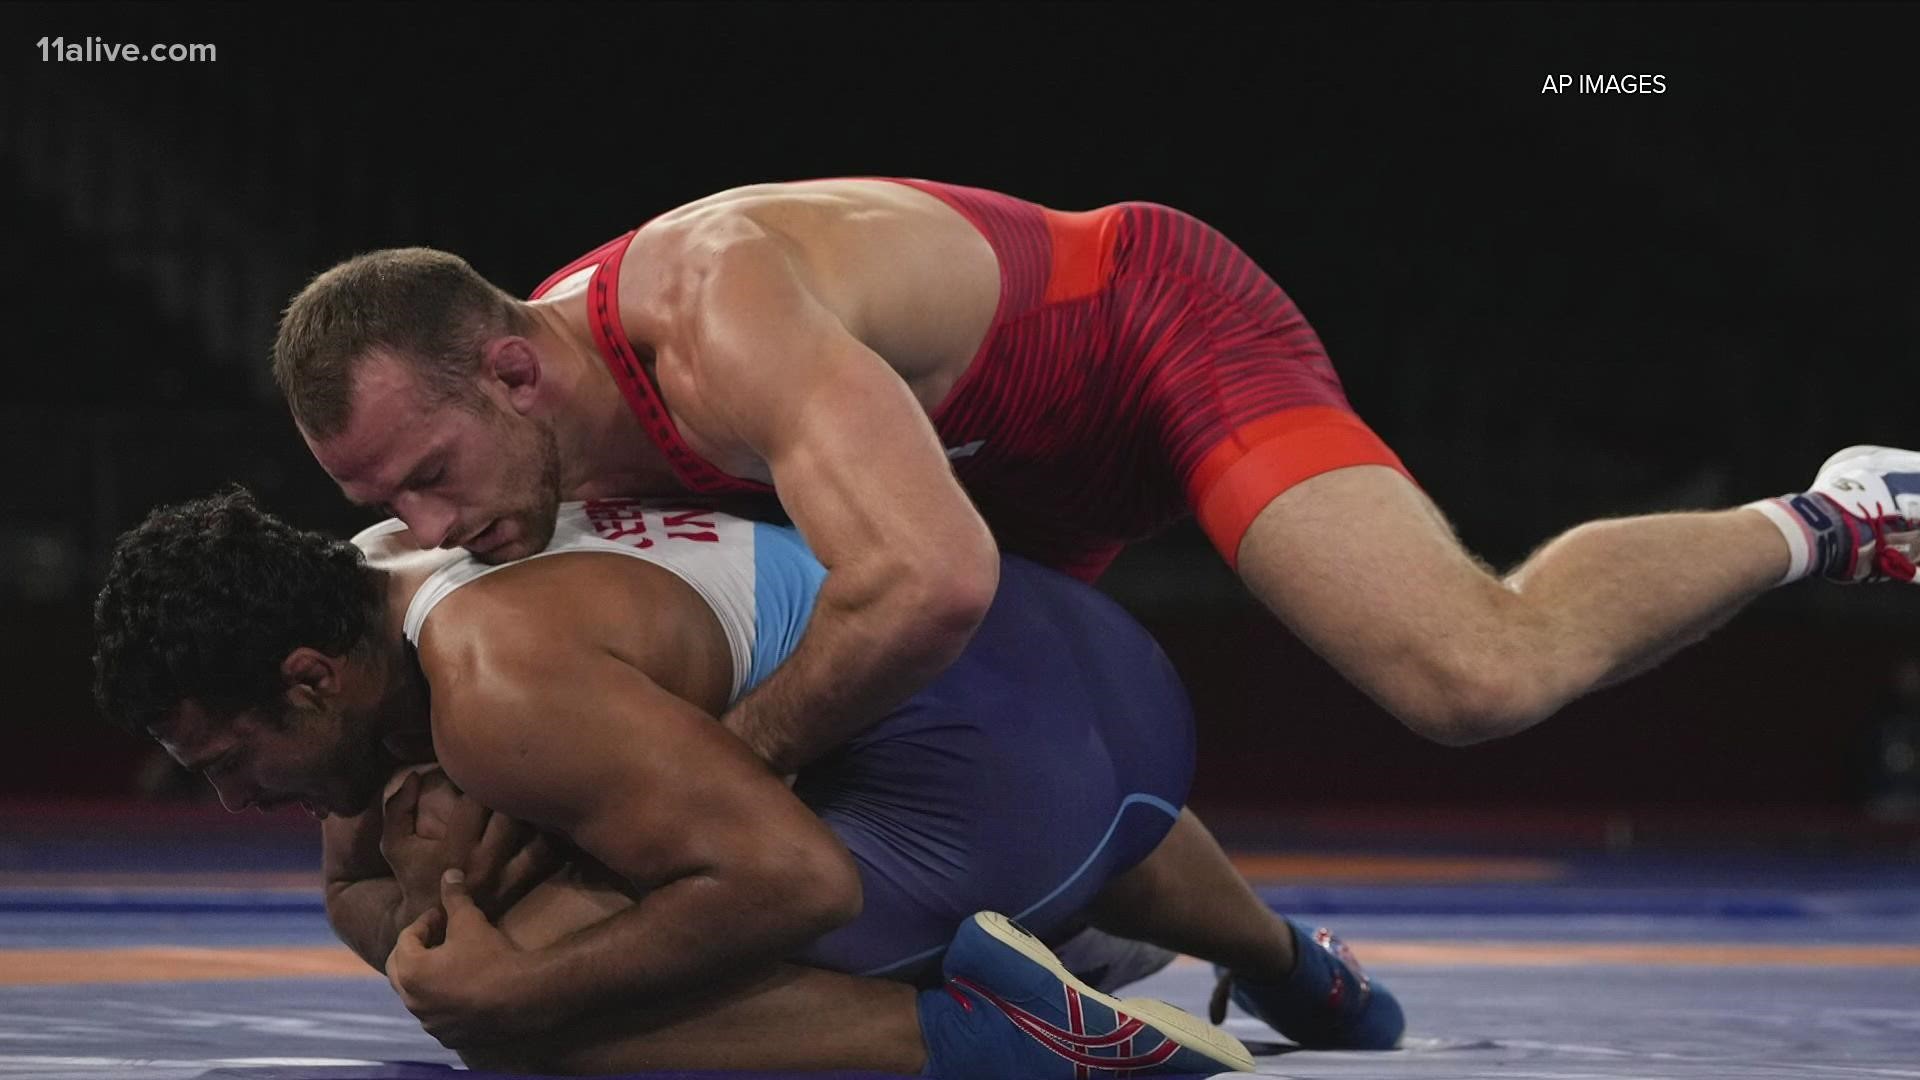 David Taylor wrestling Olympics gold medal match how to watch 11alive